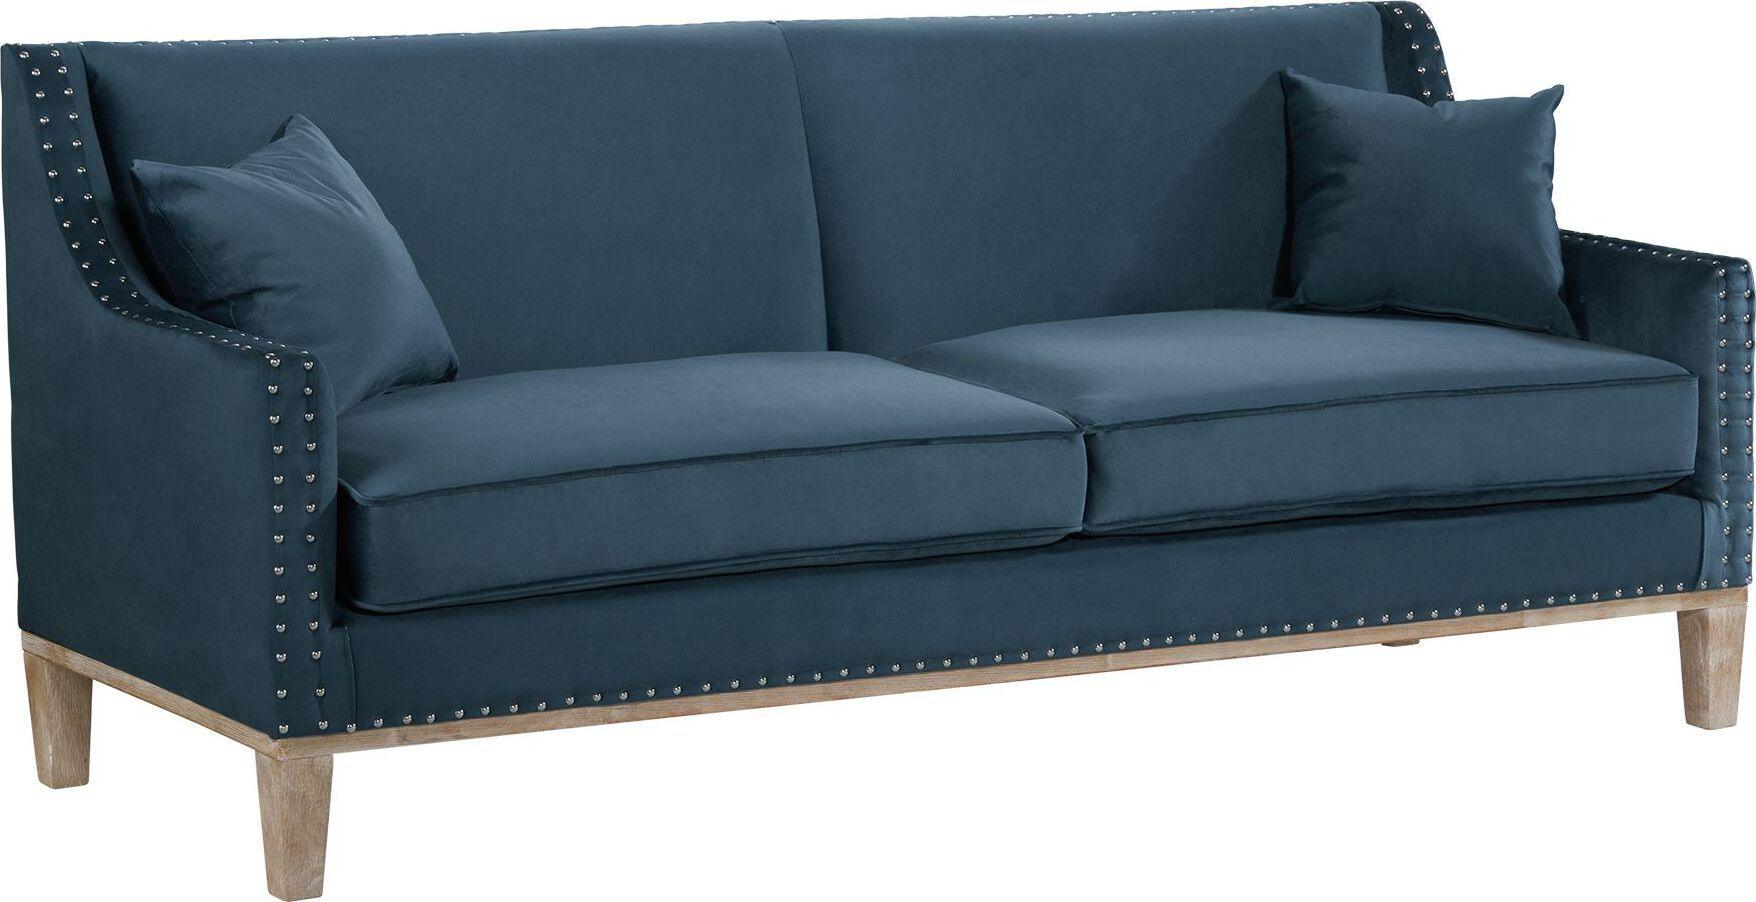 Elements Sofas & Couches - Aster Sofa Navy